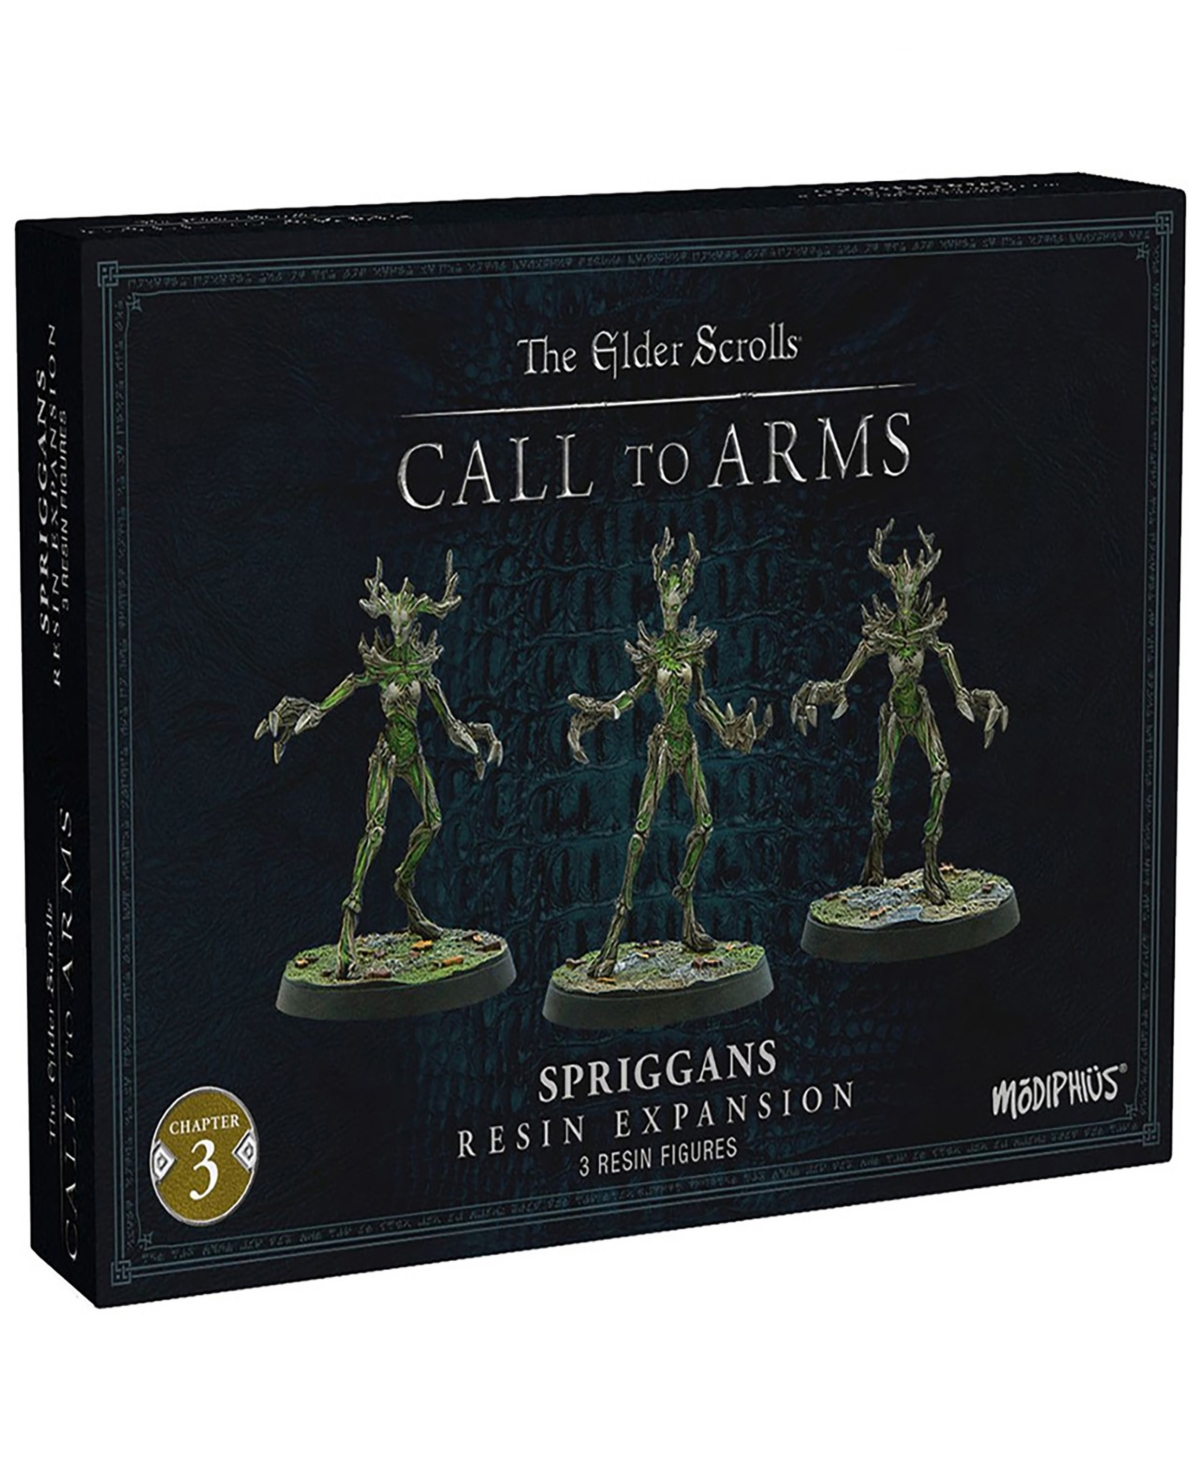 Modiphius The Elder Scrolls Call To Arms Spriggans Expansion 3 Unpainted Resin Miniatures Bases, Roleplaying G In Multi